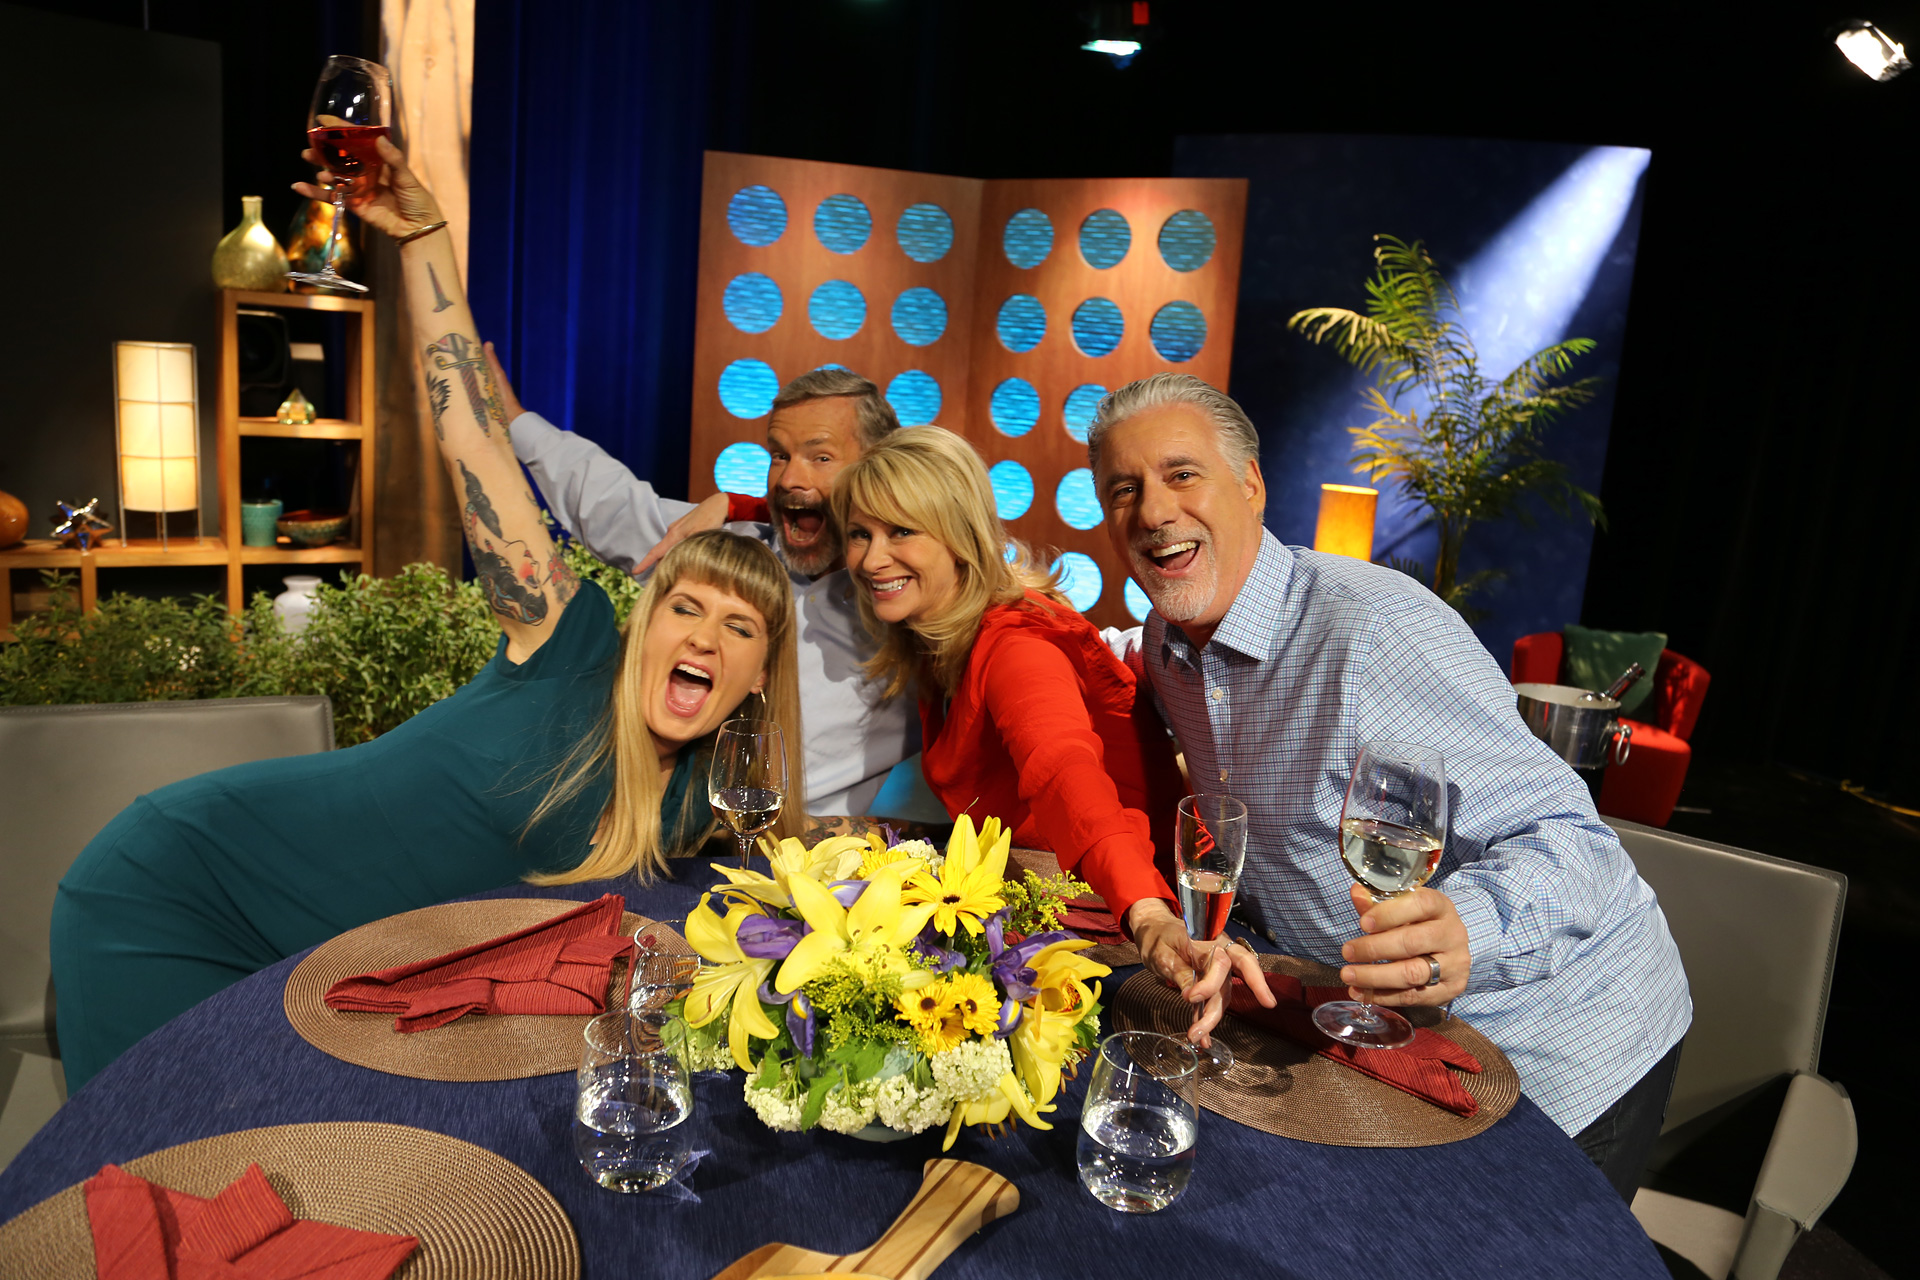 Host Leslie Sbrocco and guests having fun on the set of the episode 11 of season 11.